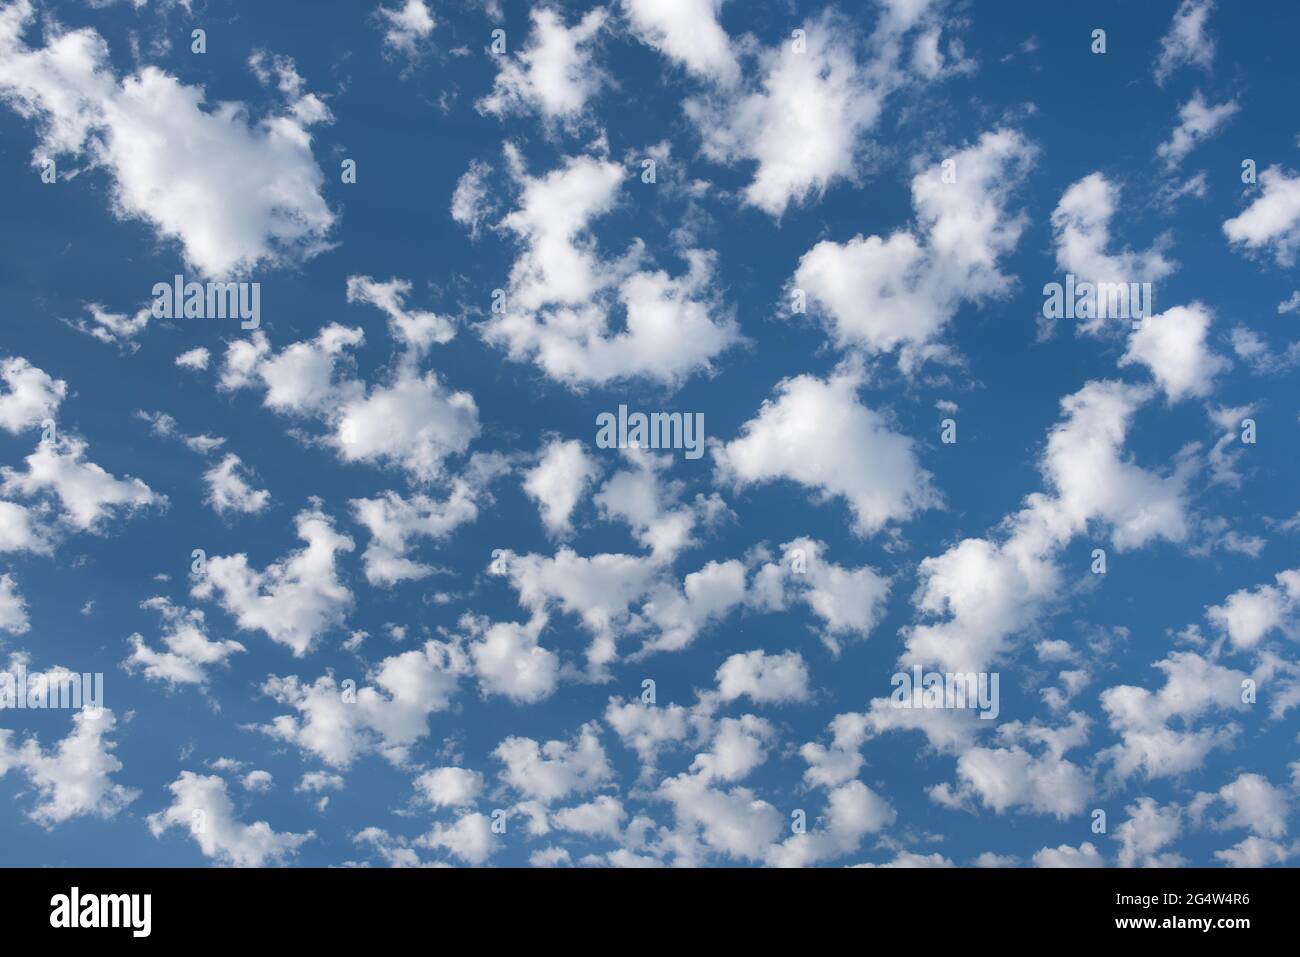 Stock photos for weather magazine websites partly cloudy blue sky. Puffy balls cotton ball clouds Stock Photo